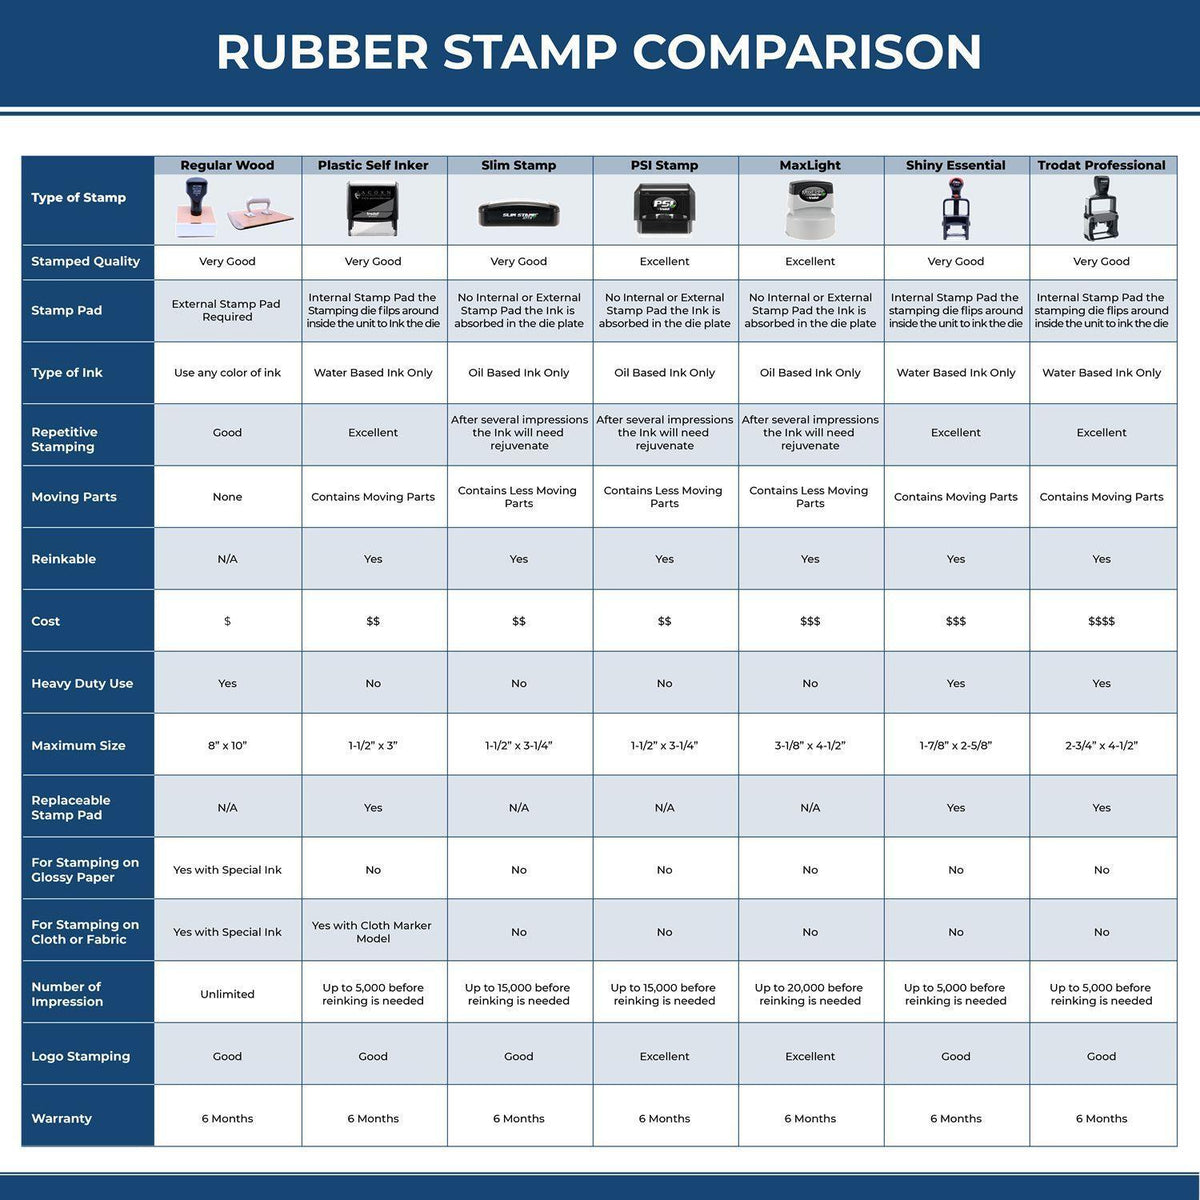 Large Narrow Posted Rubber Stamp 4957R Rubber Stamp Comparison